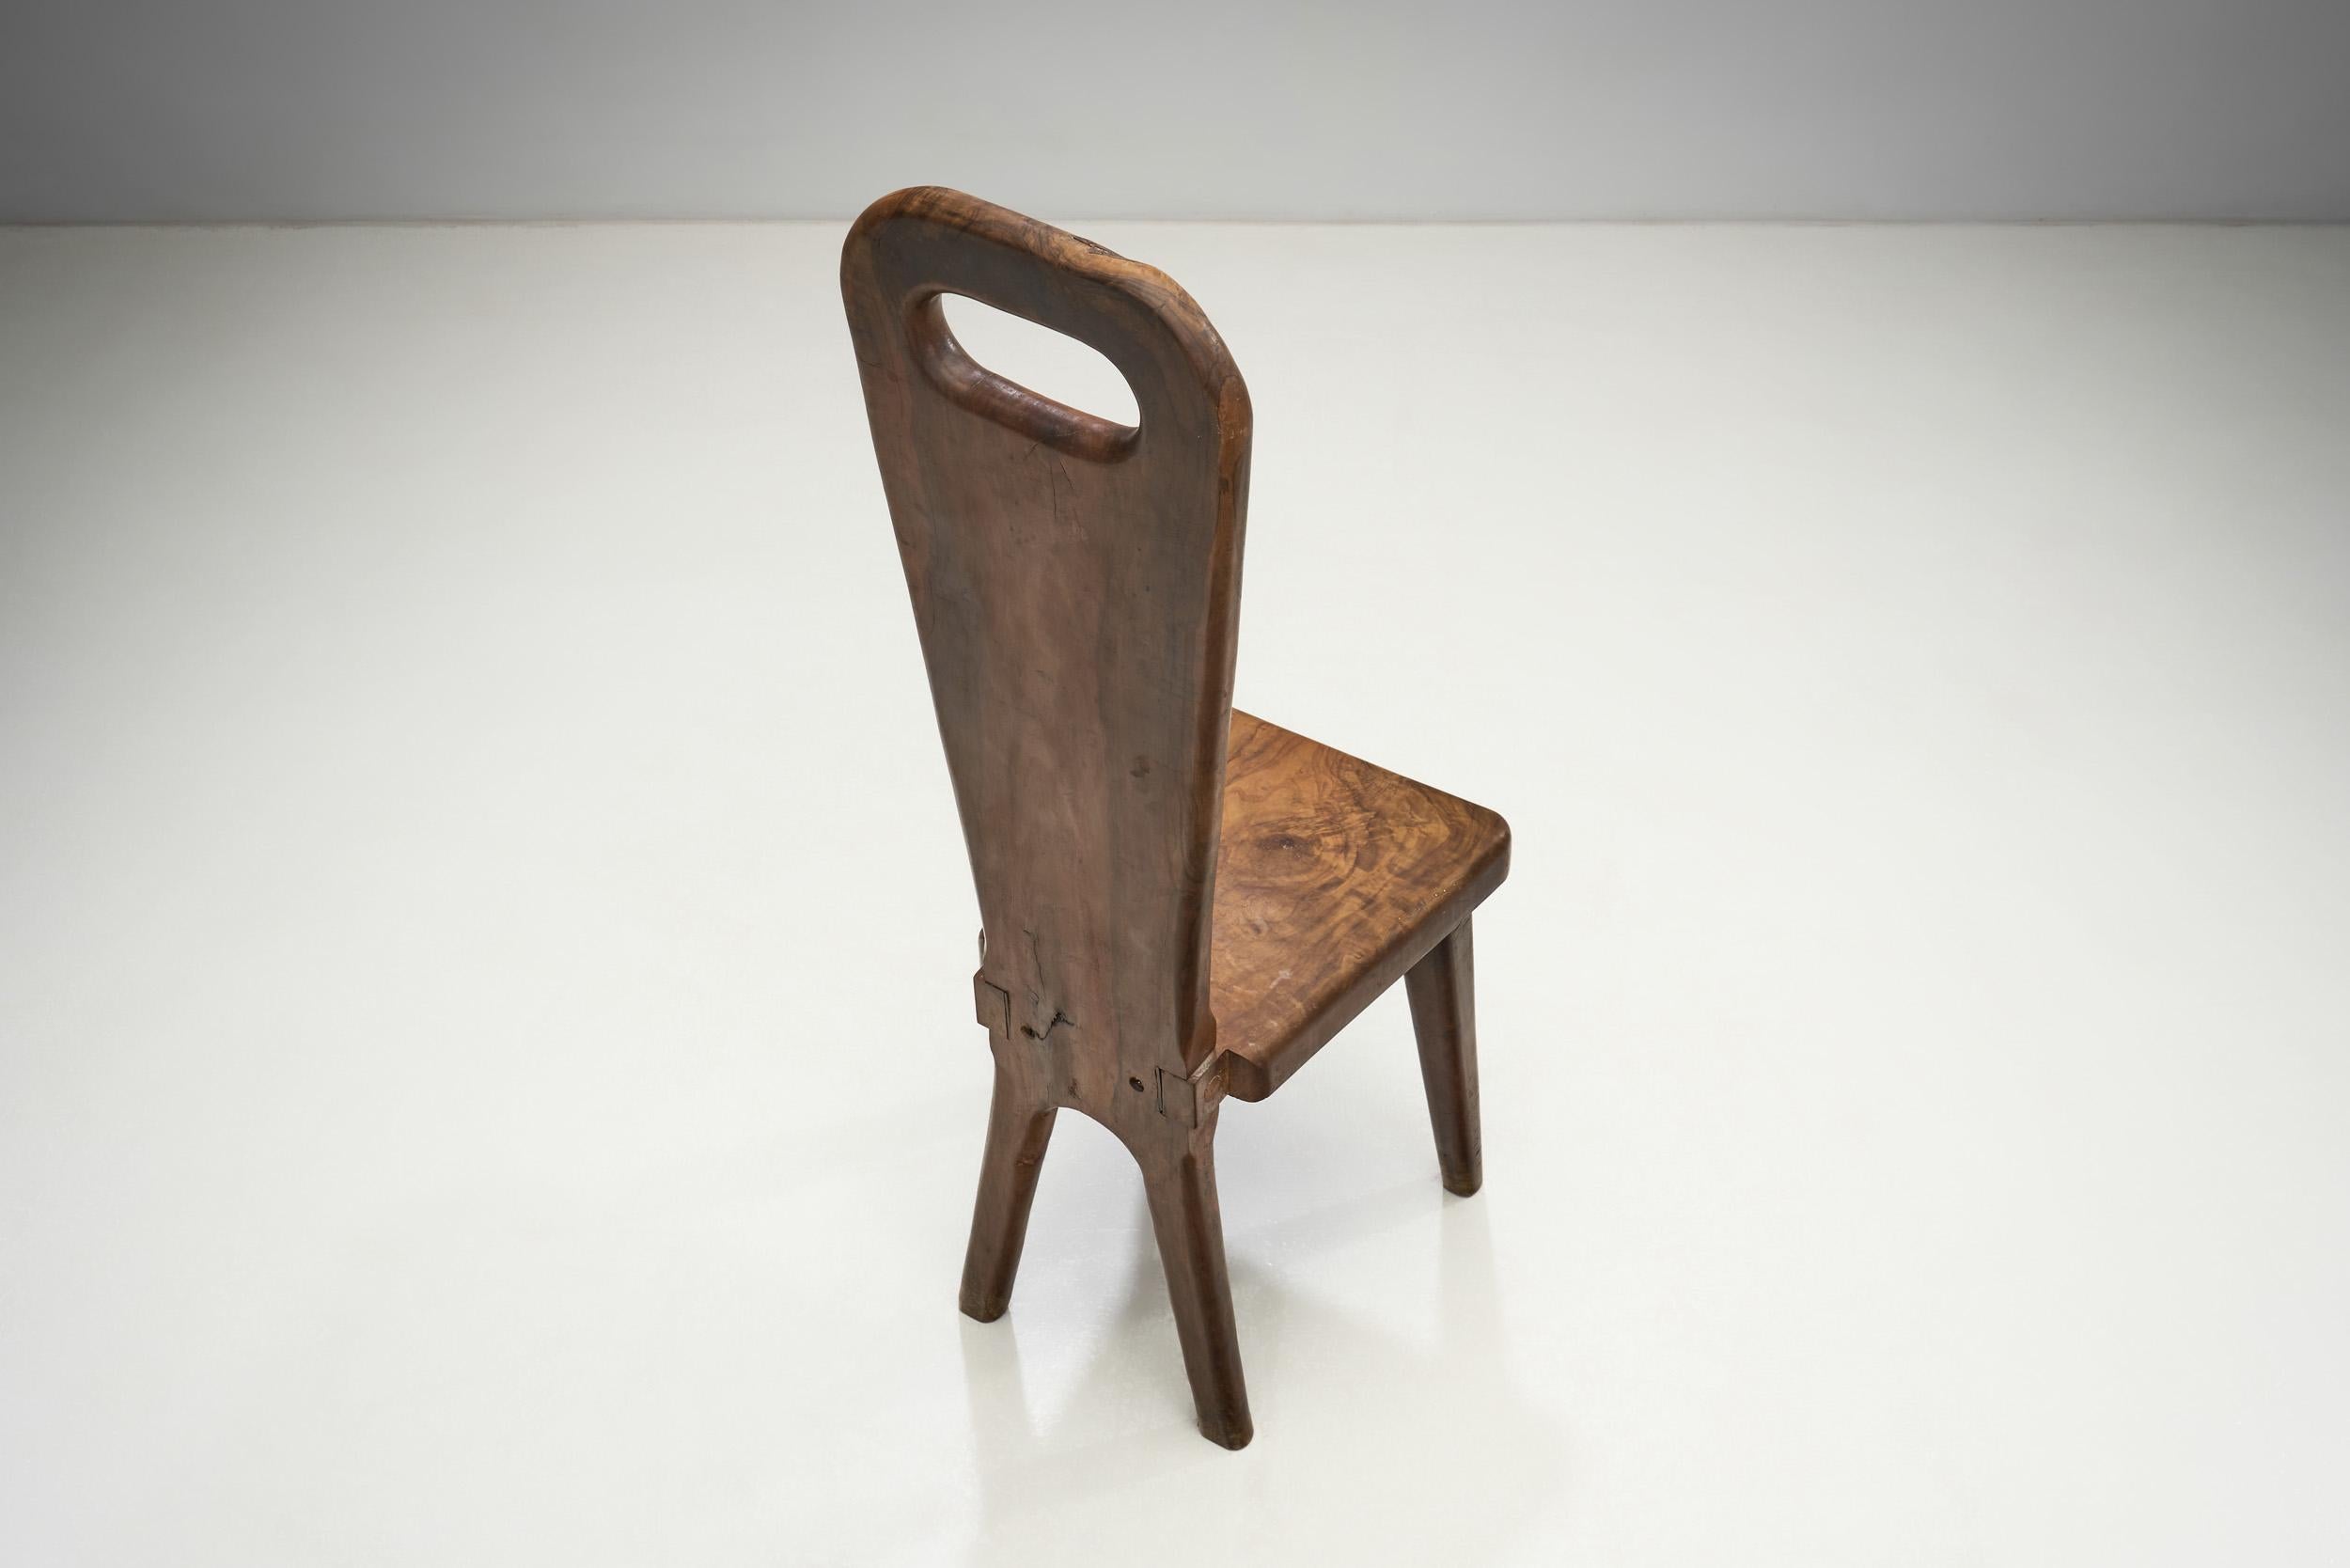 Sculptural Olive Wood High Back French Chair, France, 1970s For Sale 1